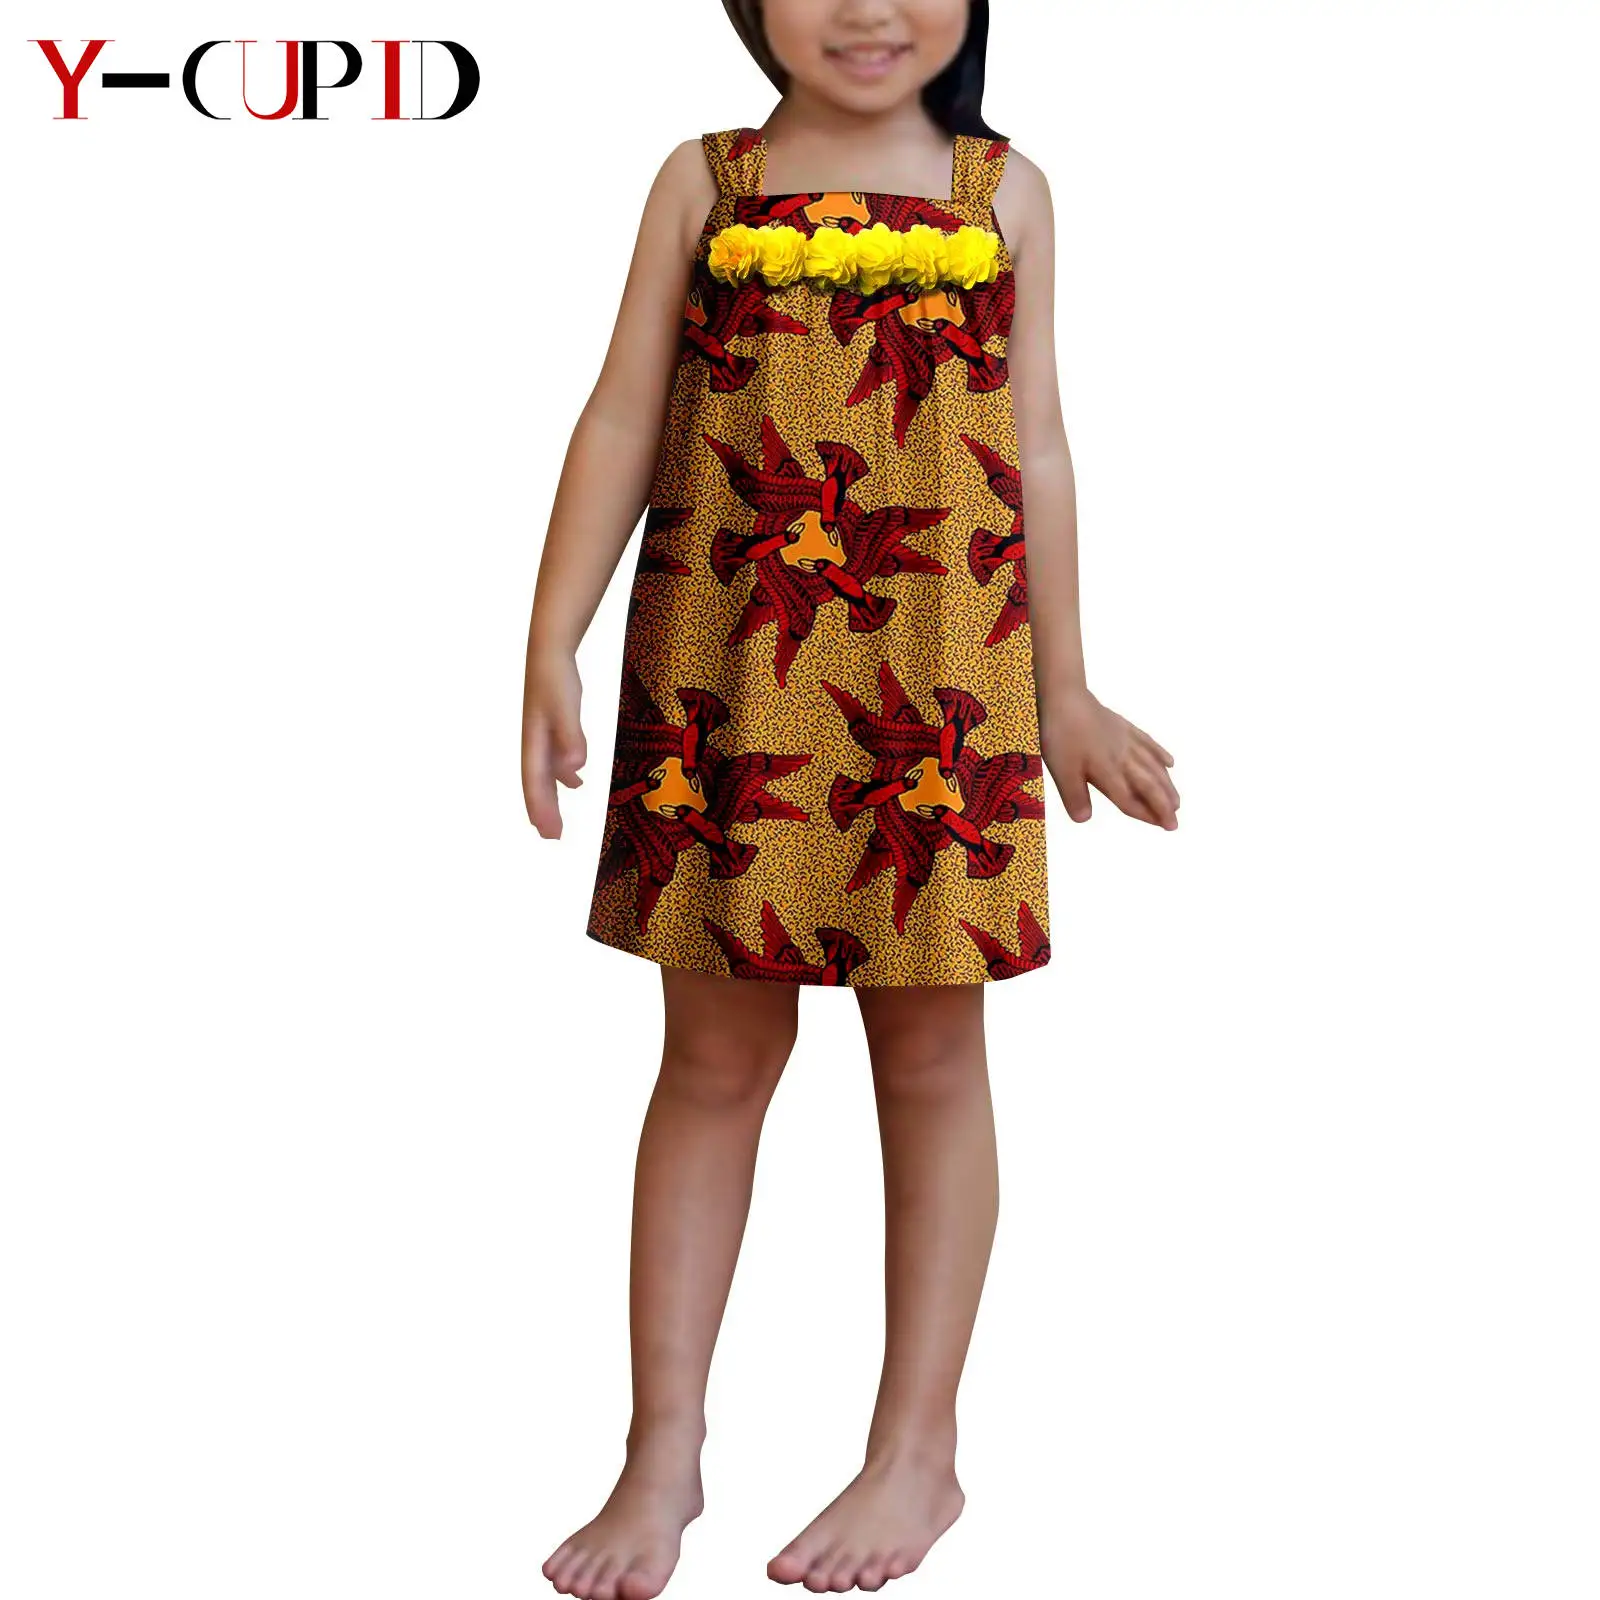 African Clothes Summer Dashiki Baby Girls Print Flower Knee-length Dresses Children Outfits Casual Ankara Kid Outwear Y224008 new children s boots girls knee high boots princess edition children s tall boots children high kids shoes bota kids